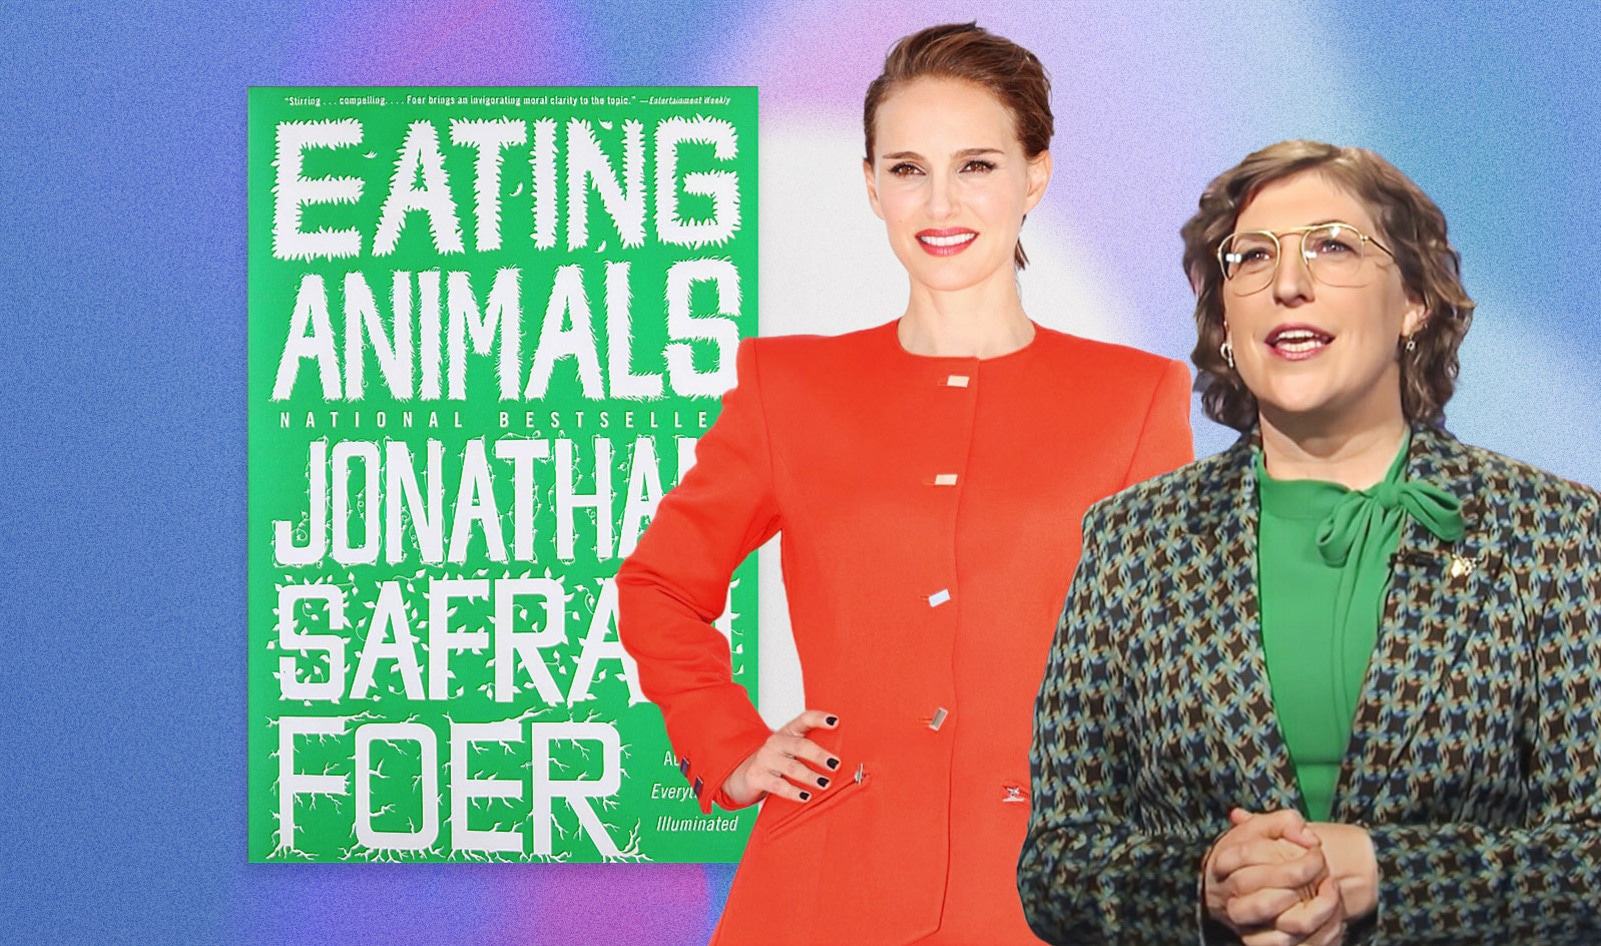 The Book that Helped Natalie Portman and Mayim Bialik Ditch Meat Turns 14